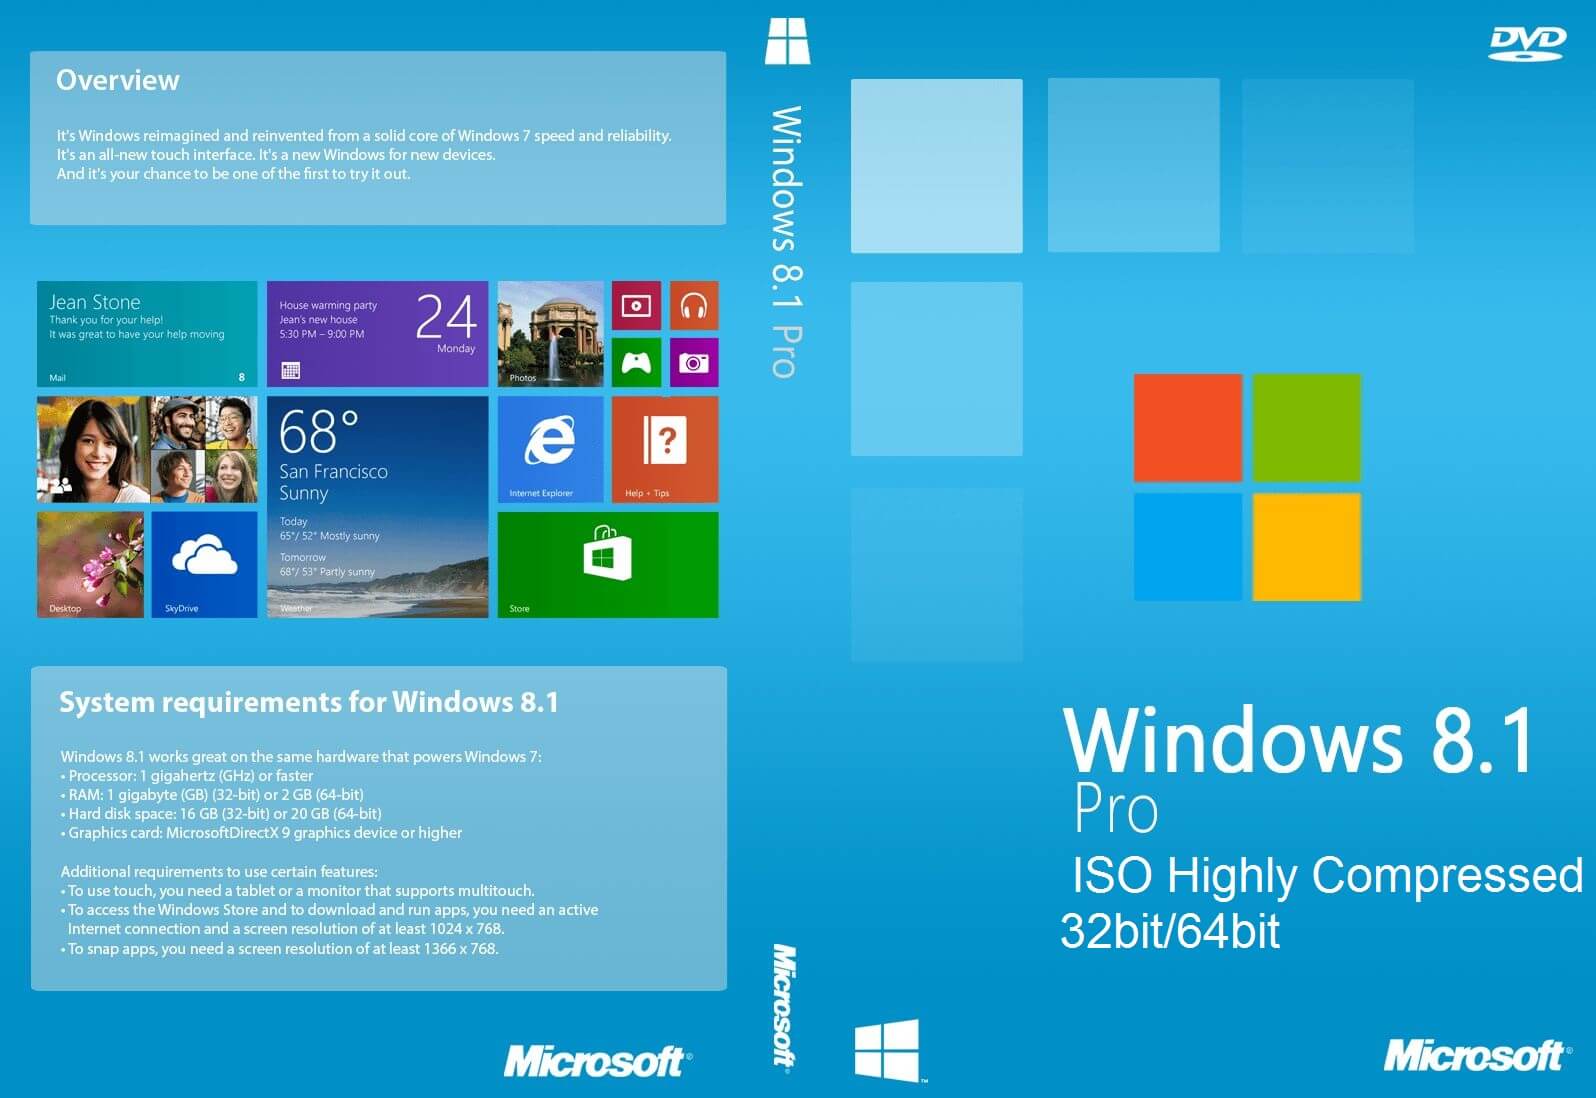 windows vista bootable iso highly compressed